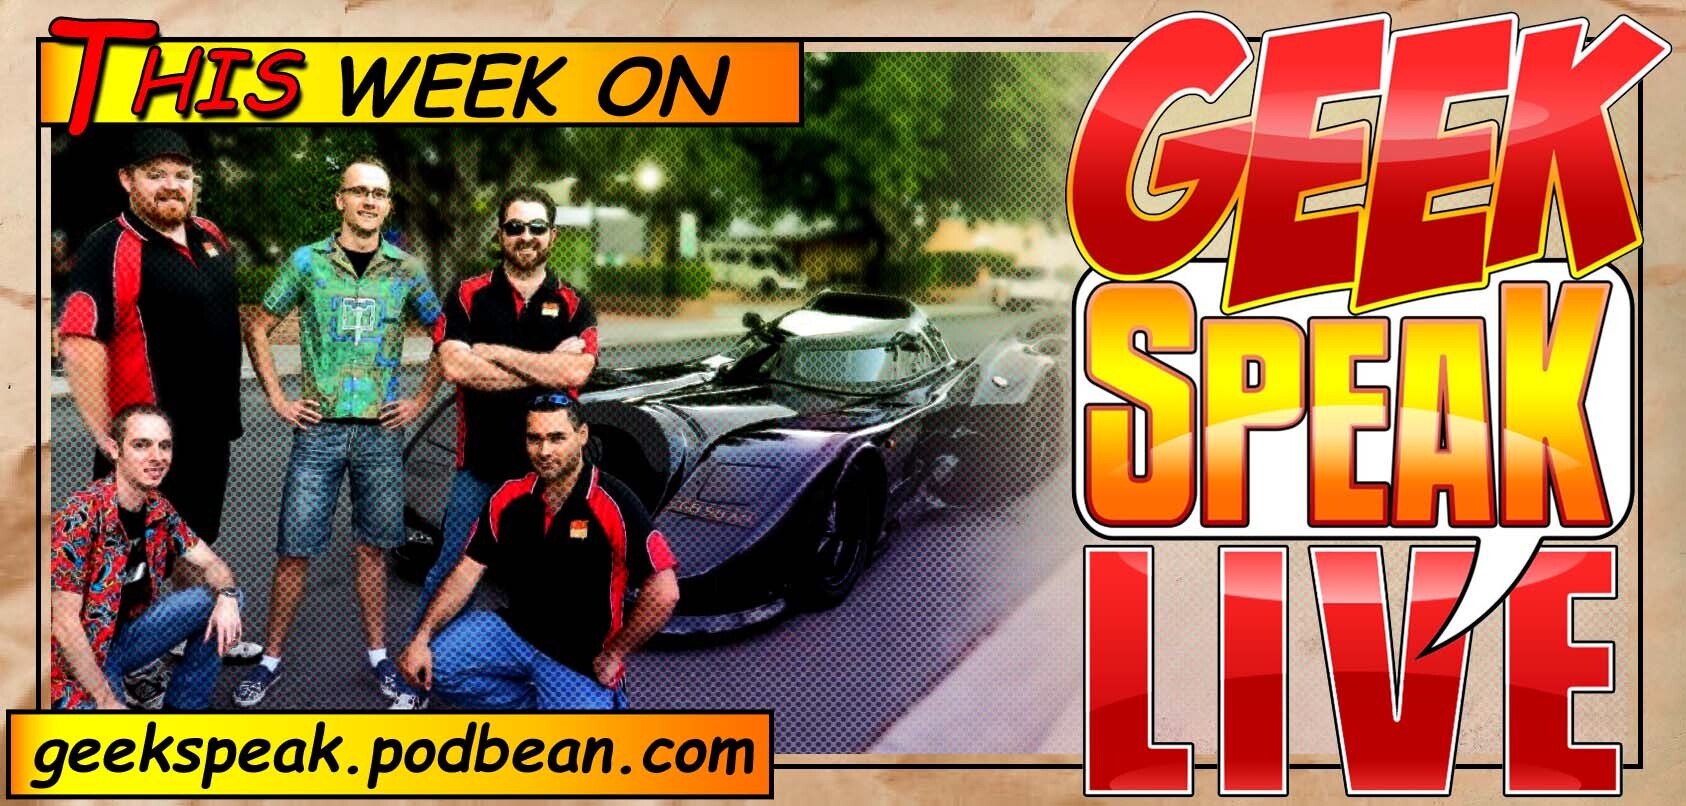 EXCLUSIVE we joyride in the WORLD'S ONLY STREET LEGAL 89 BATMOBILE!